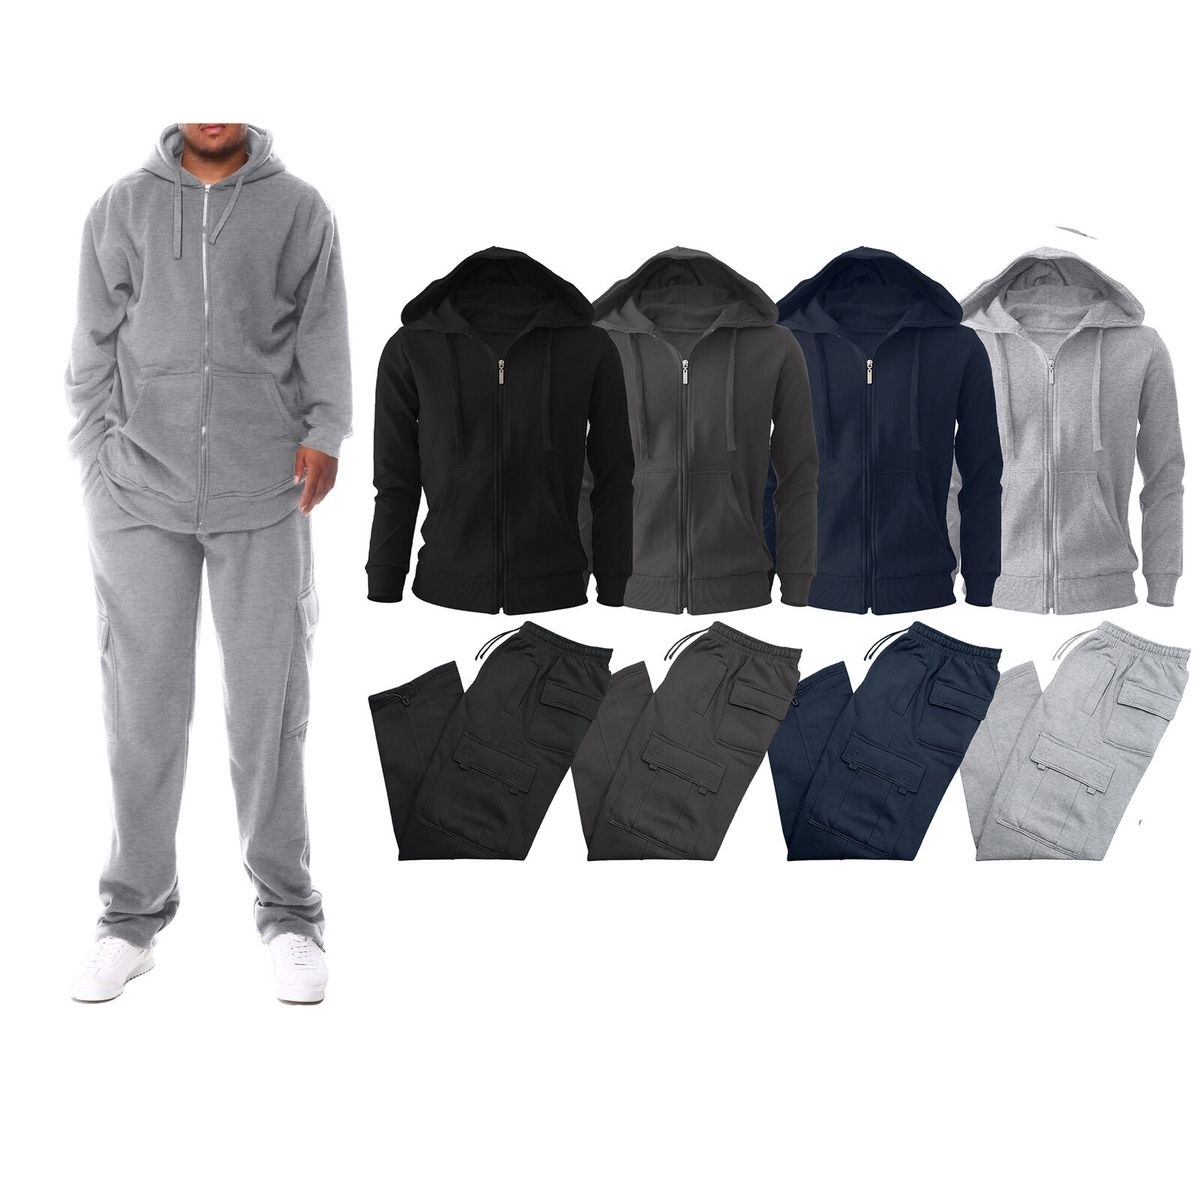 Multi-Pack: Men's Big & Tall Winter Warm Athletic Active Cozy Fleece Lined Multi-Pocket Full Zip Up Cargo Tracksuit - Grey, 2-pack, Xx-large